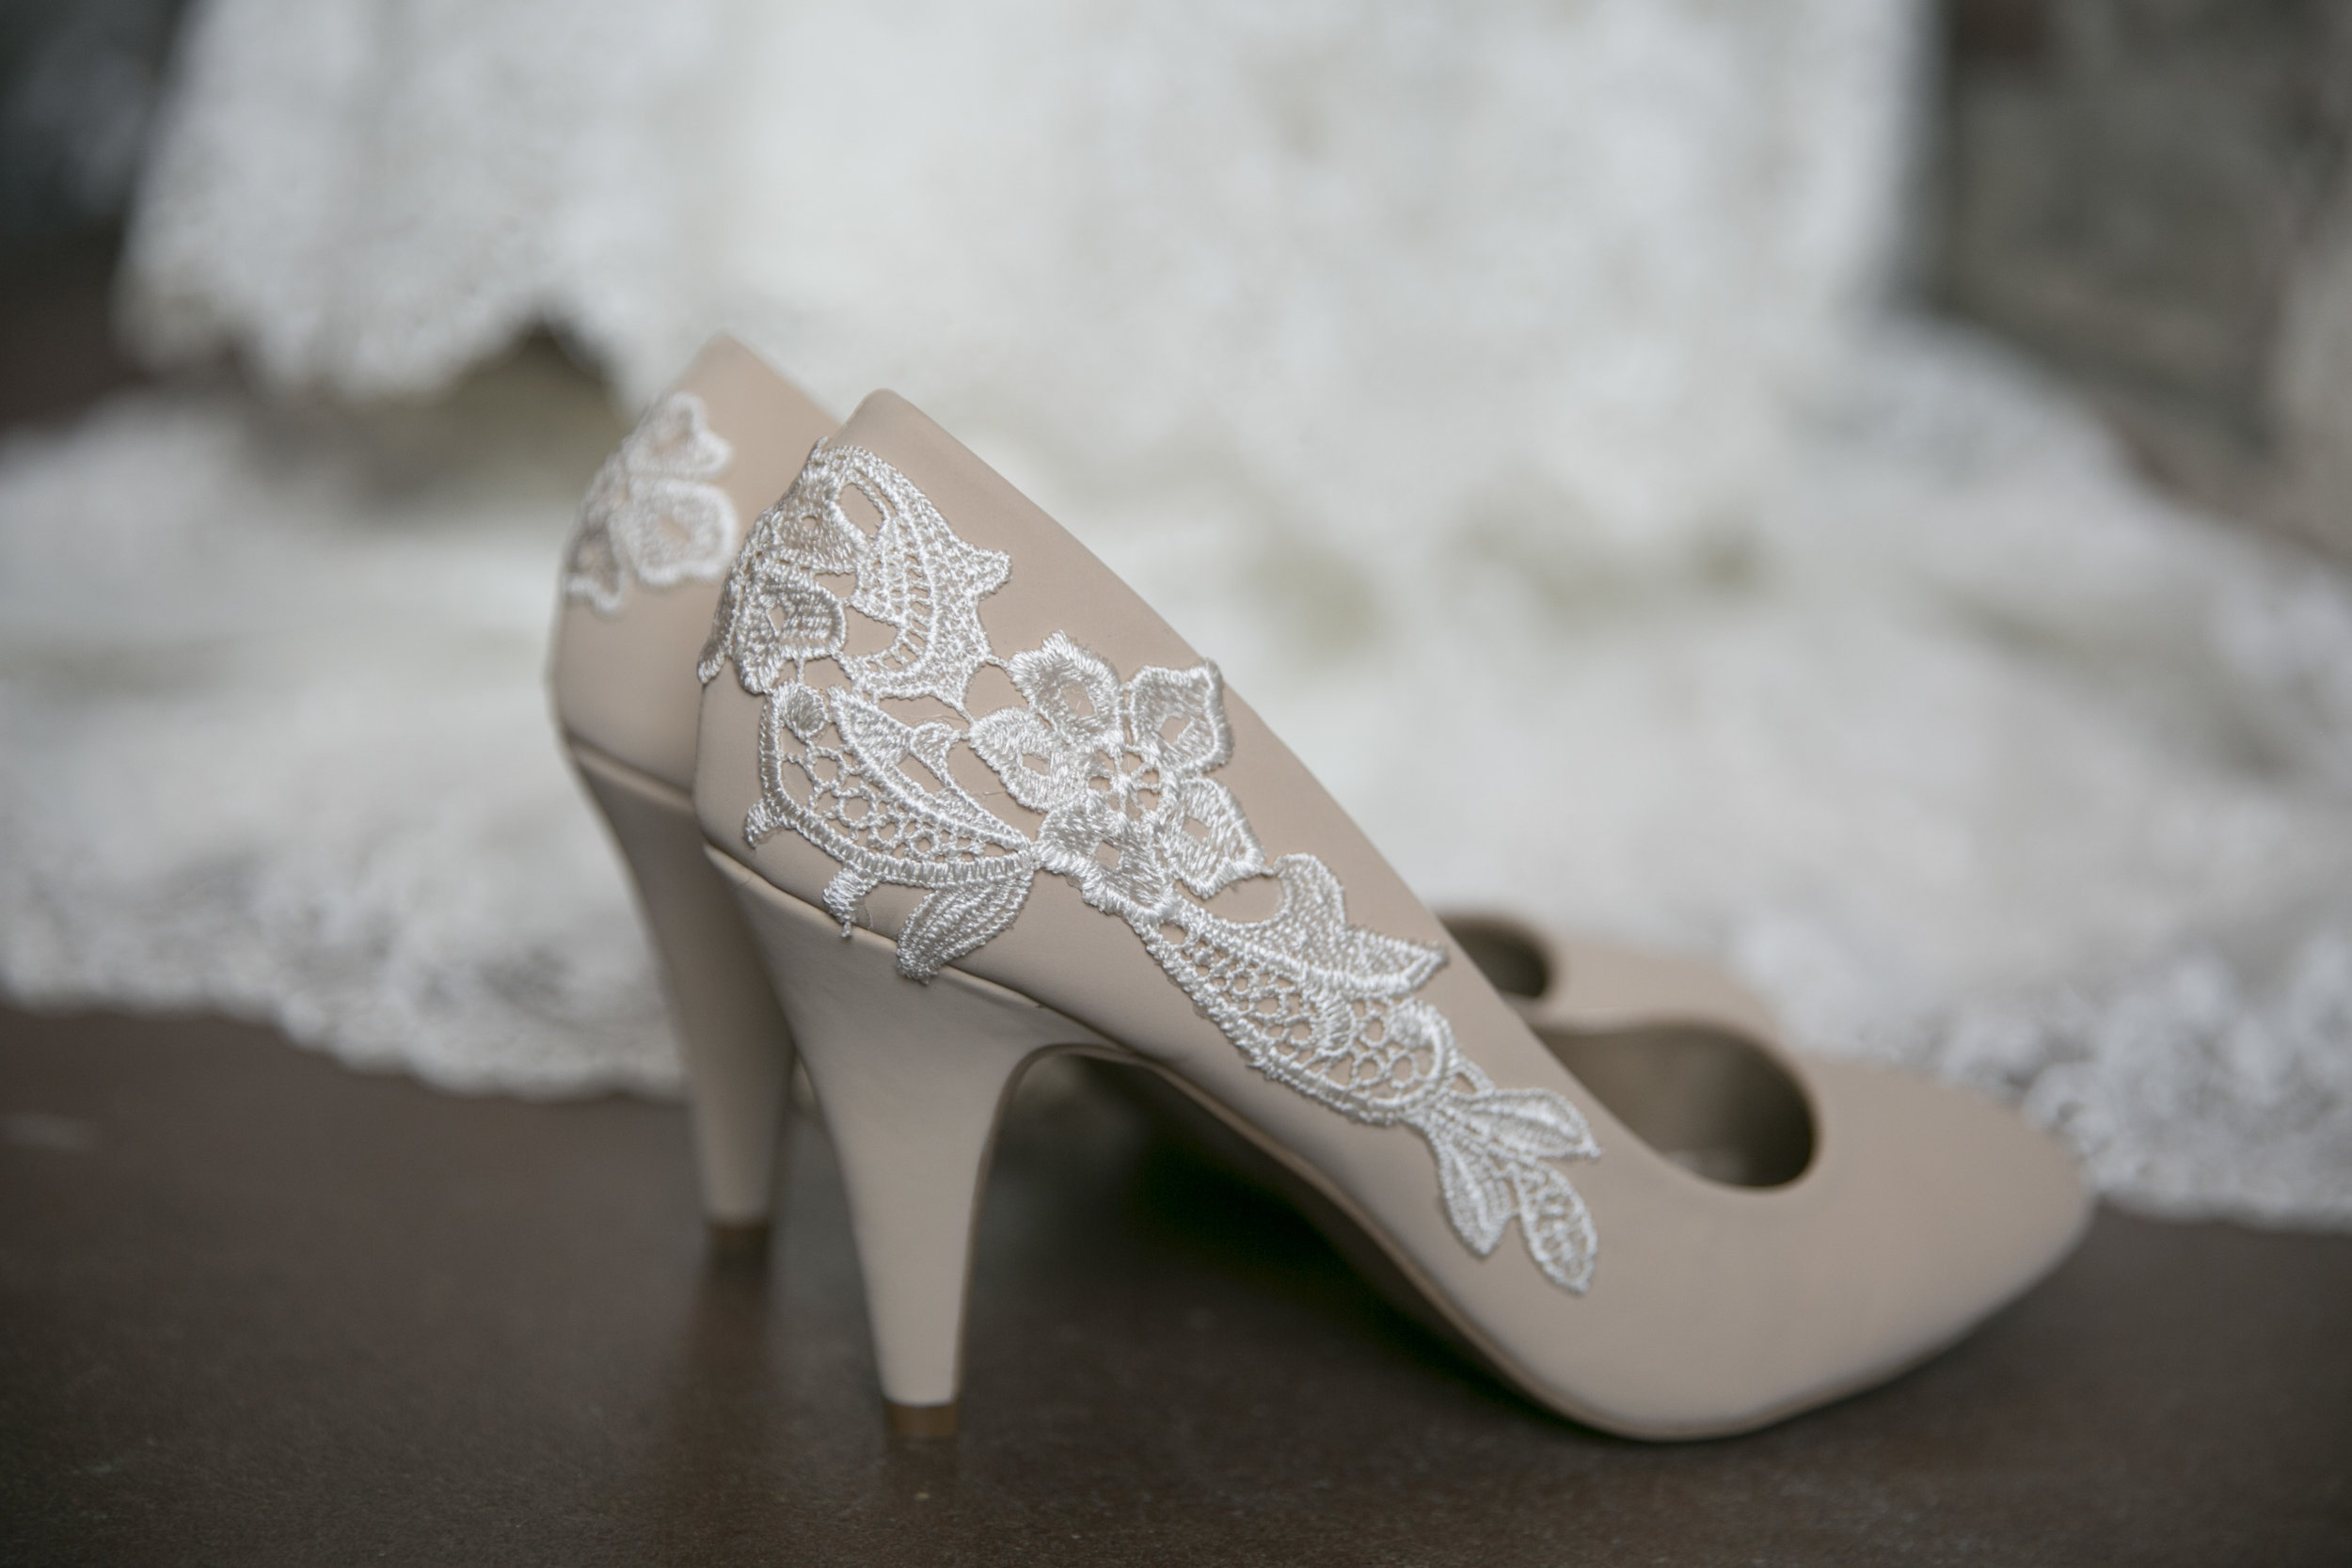 Alicia was decked out with lace from her dress to her shoes!